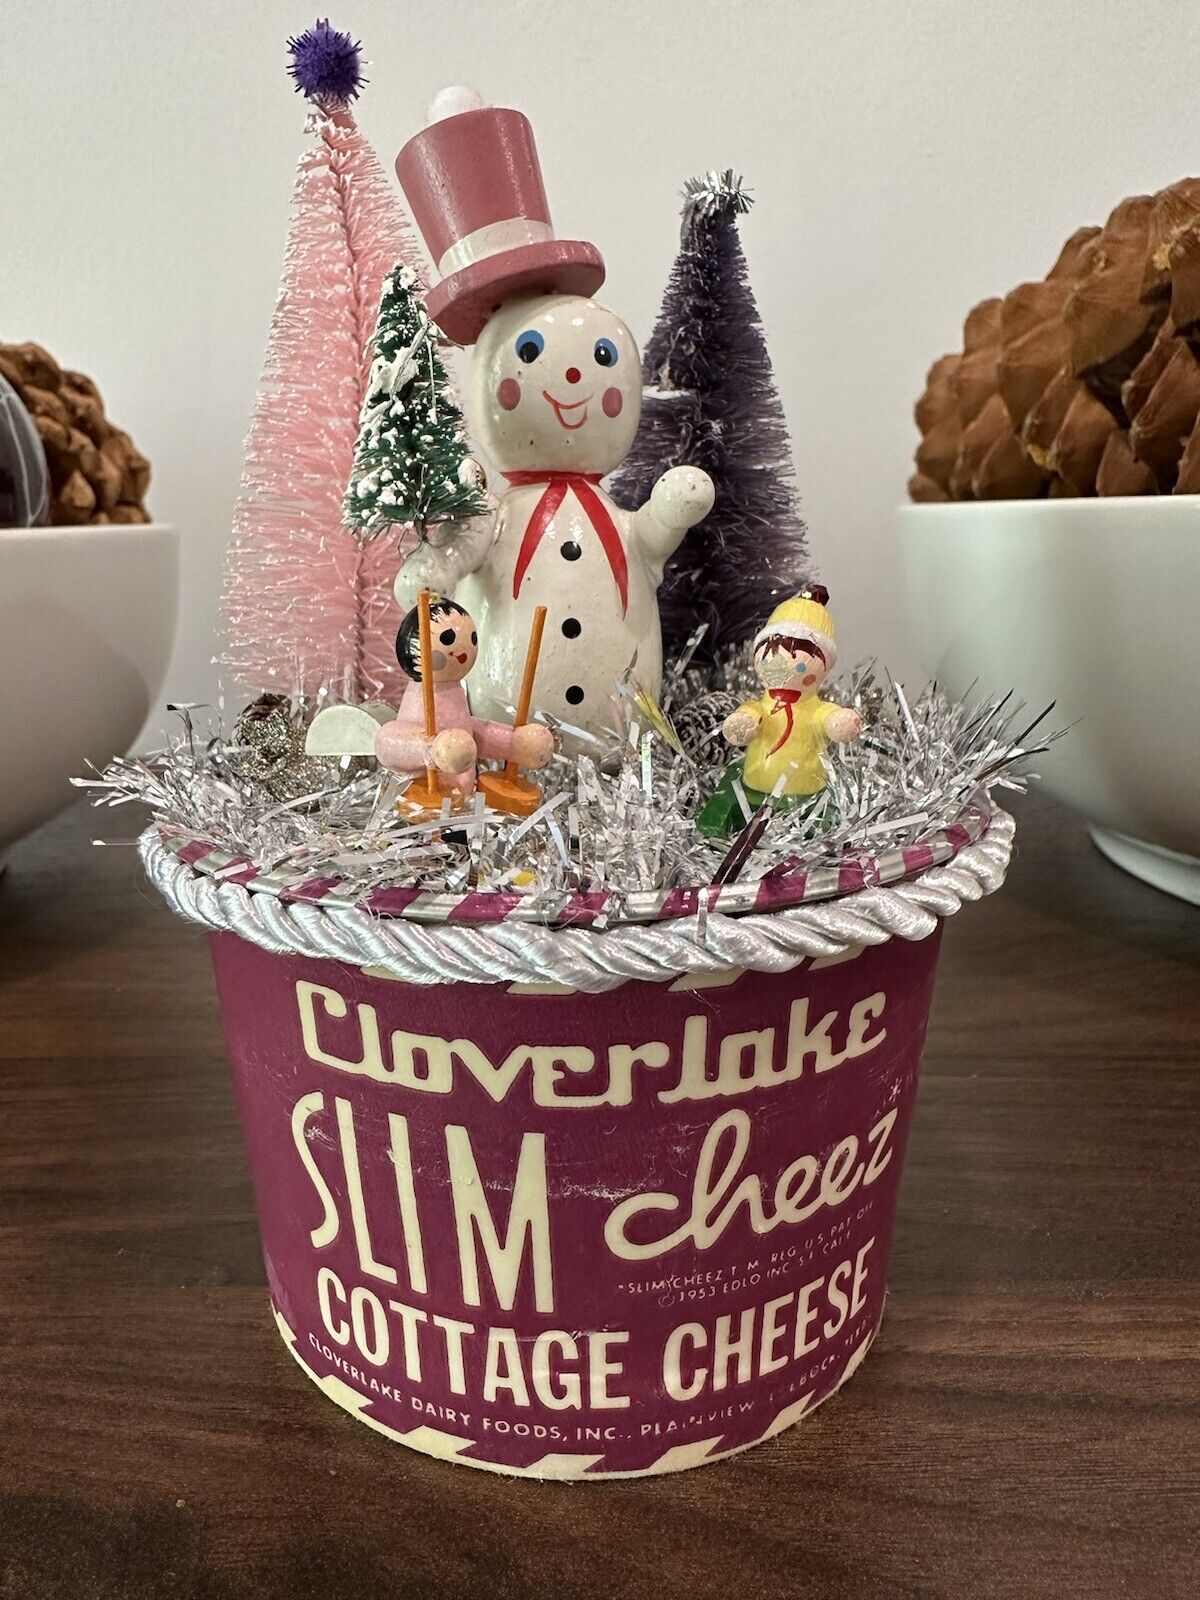 Vintage Kitsch Christmas Holiday Decor- Cottage Cheese, Snowman